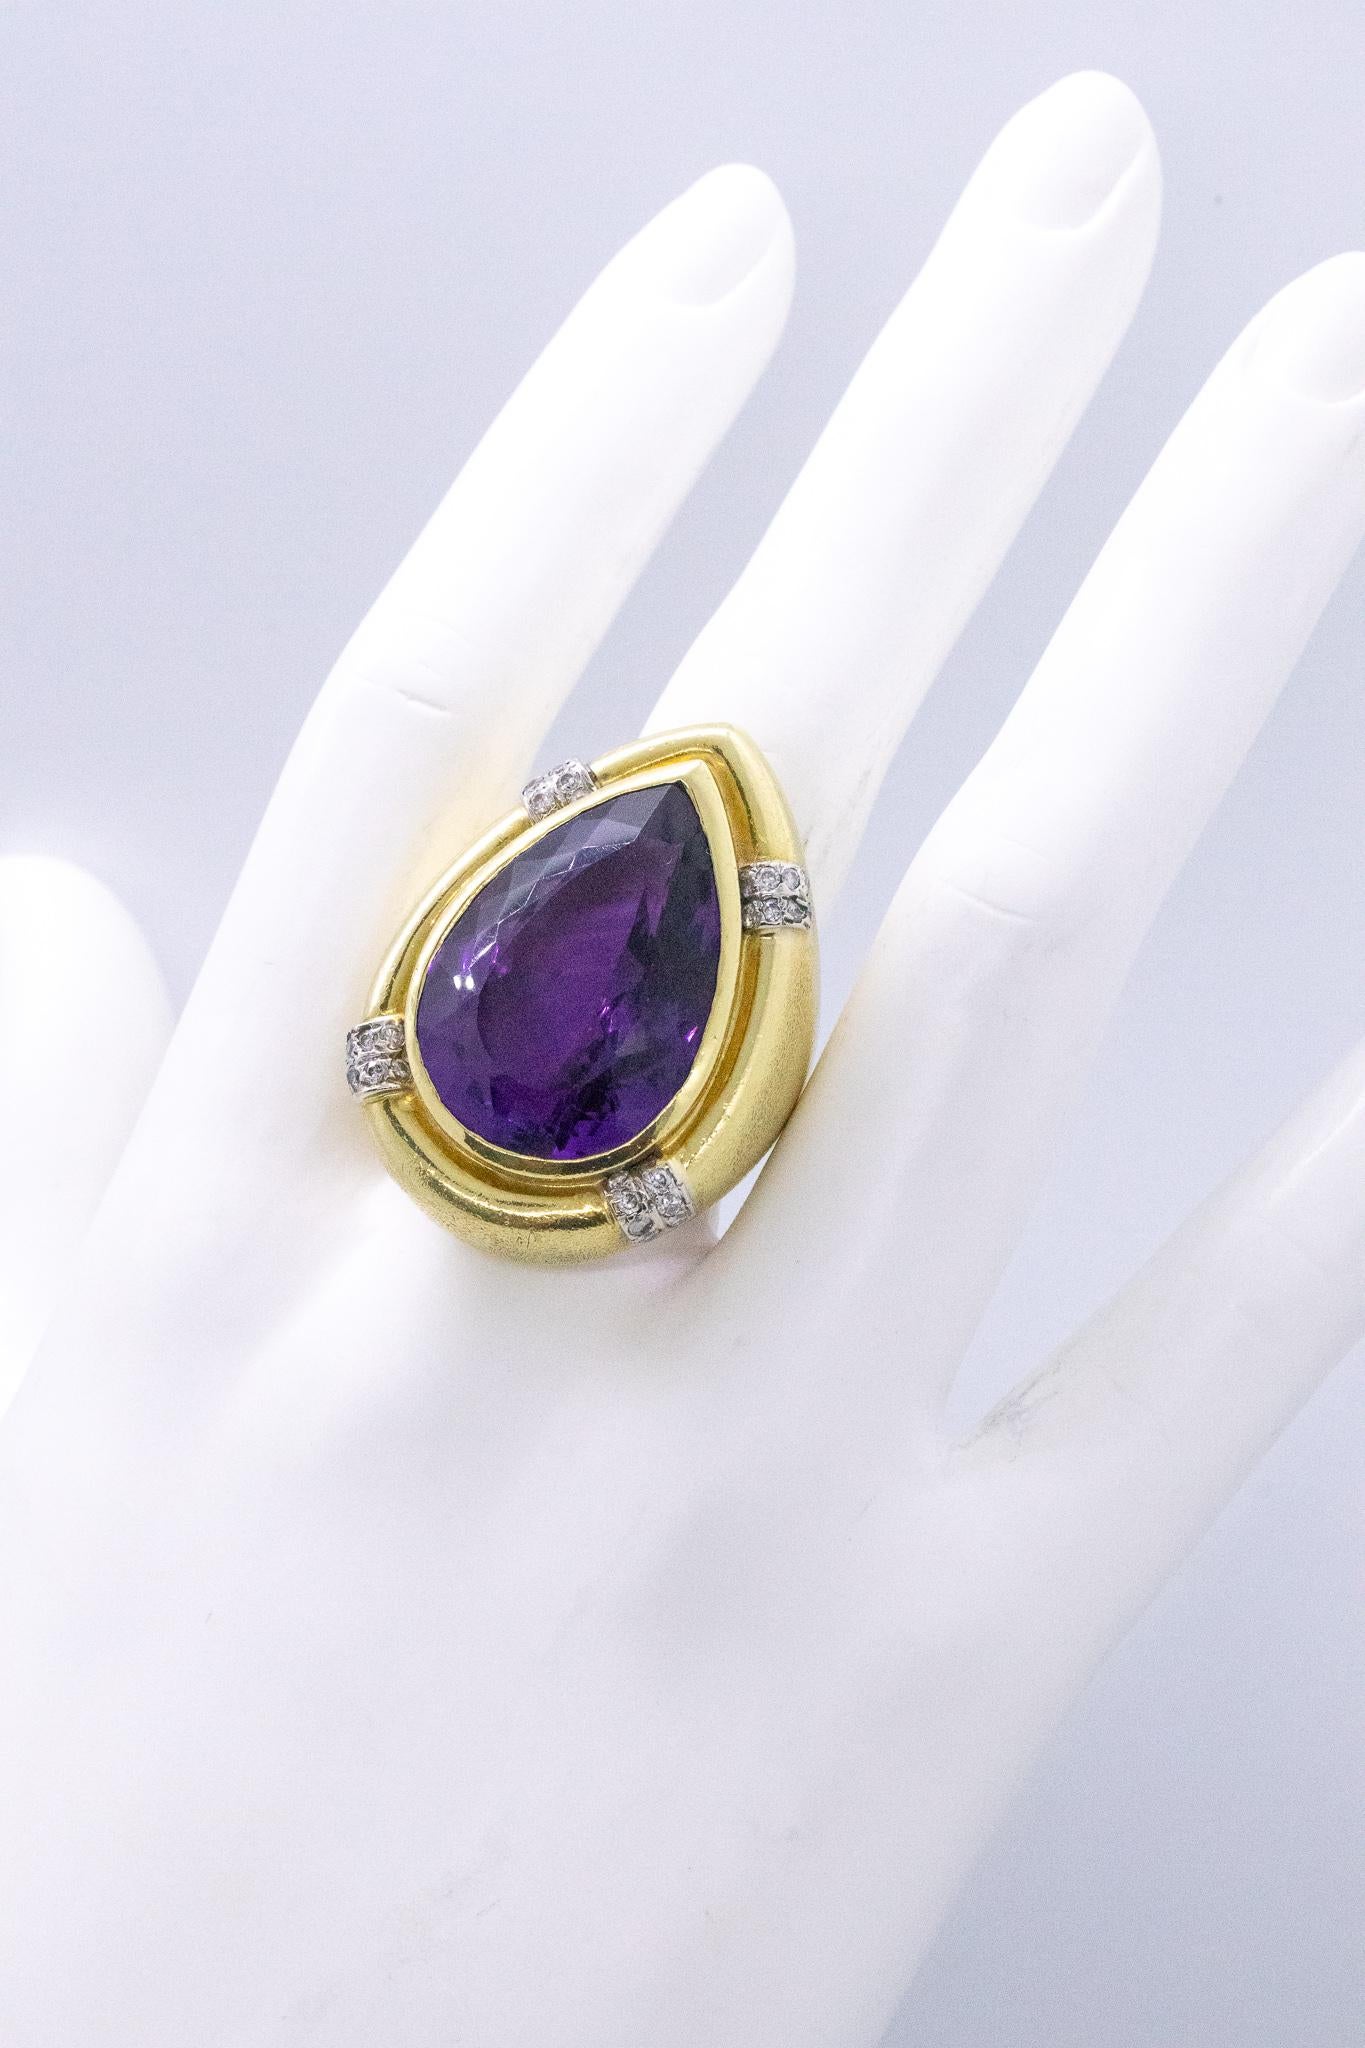 Retro 1970 Oversized Cocktail Ring 18Kt Gold 31.77 Cts in Diamonds and Amethyst 1